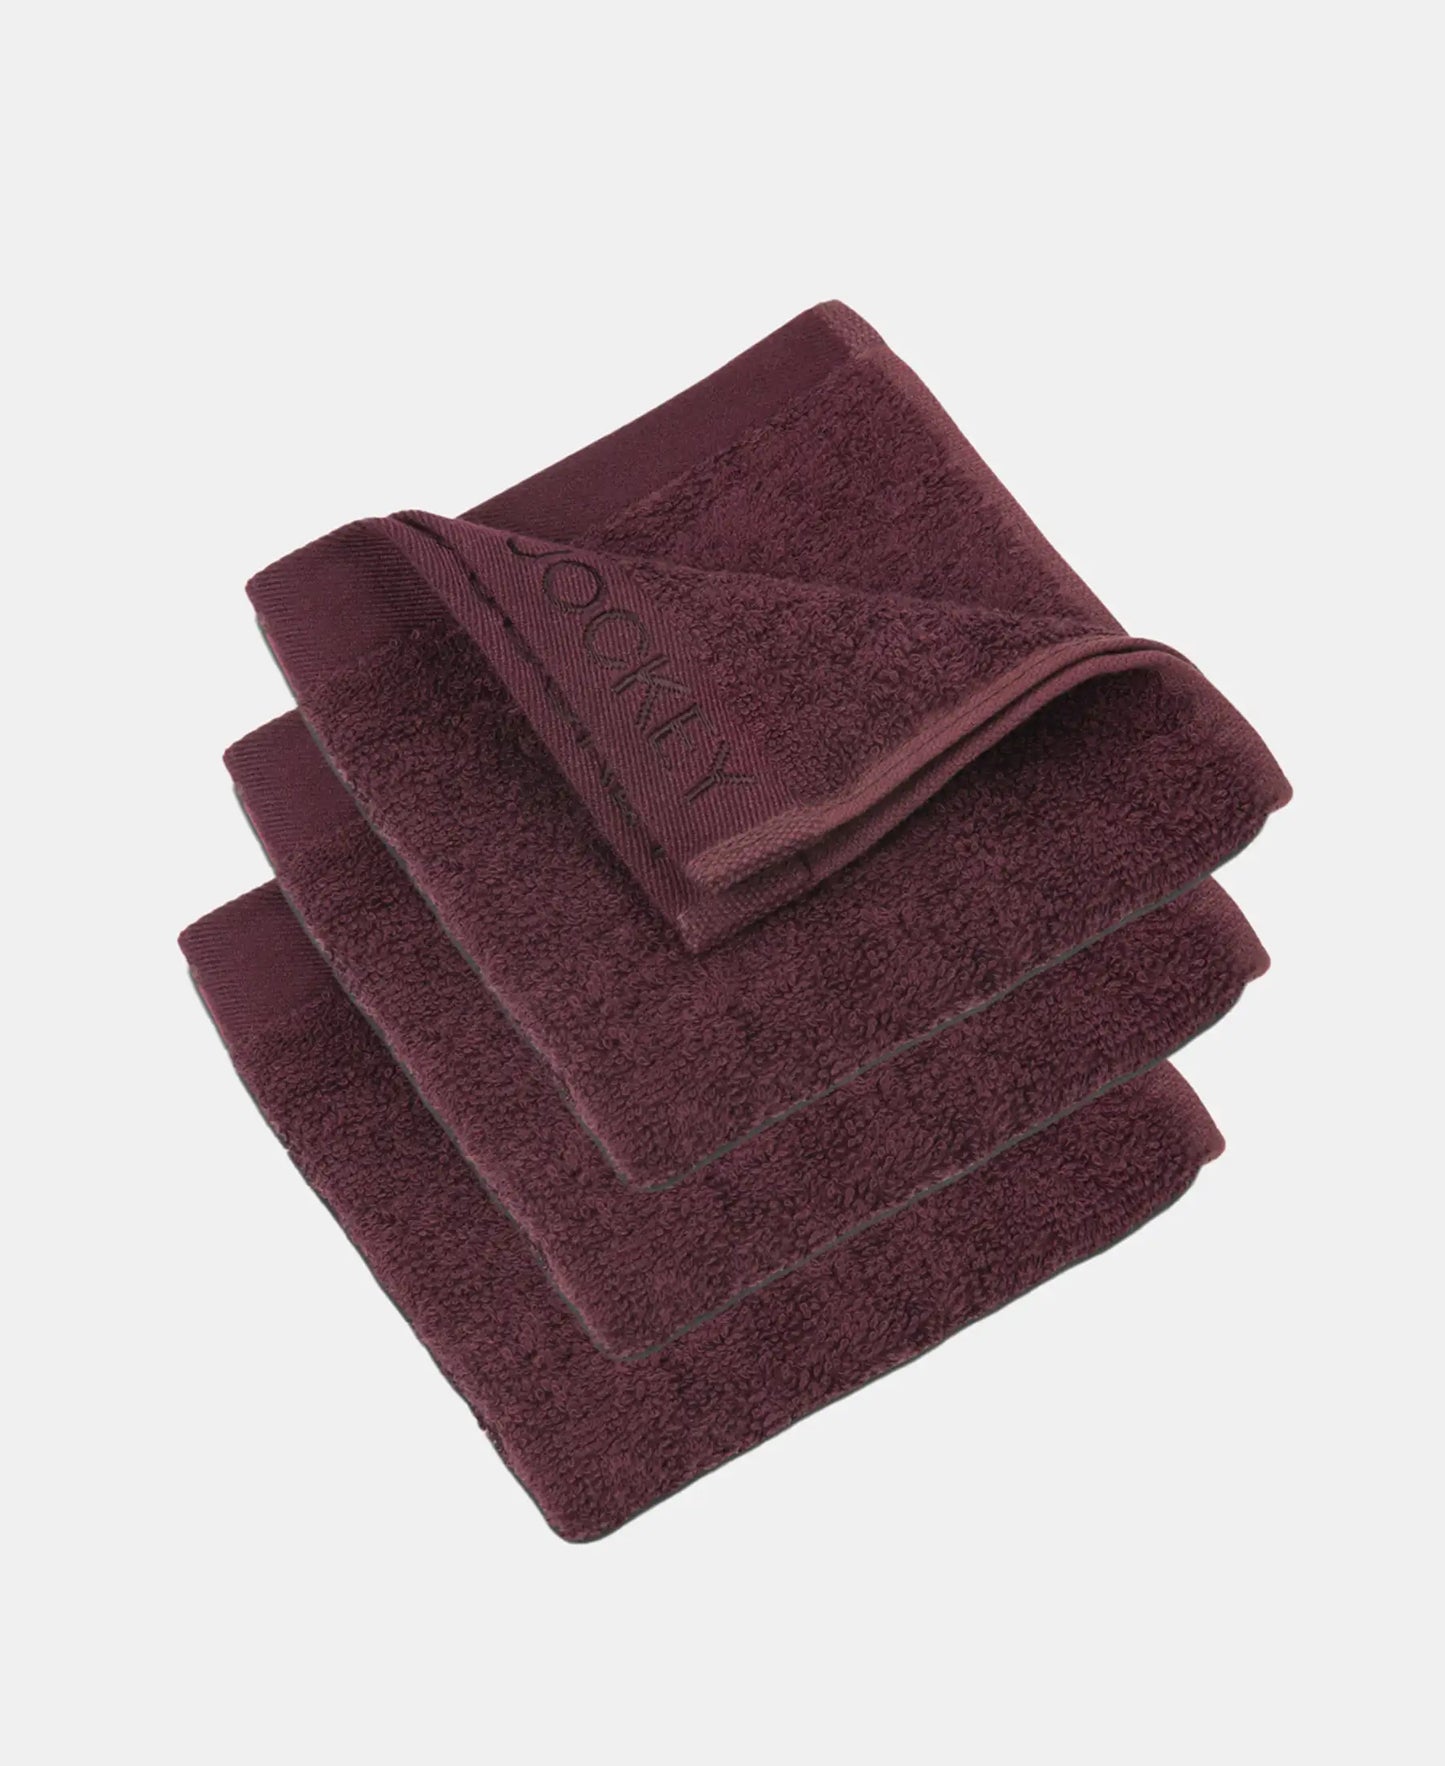 Bamboo Cotton Blend Terry Ultrasoft and Durable Face Towel with Natural StayFresh Properties - Wine Tasting (Pack of 3)